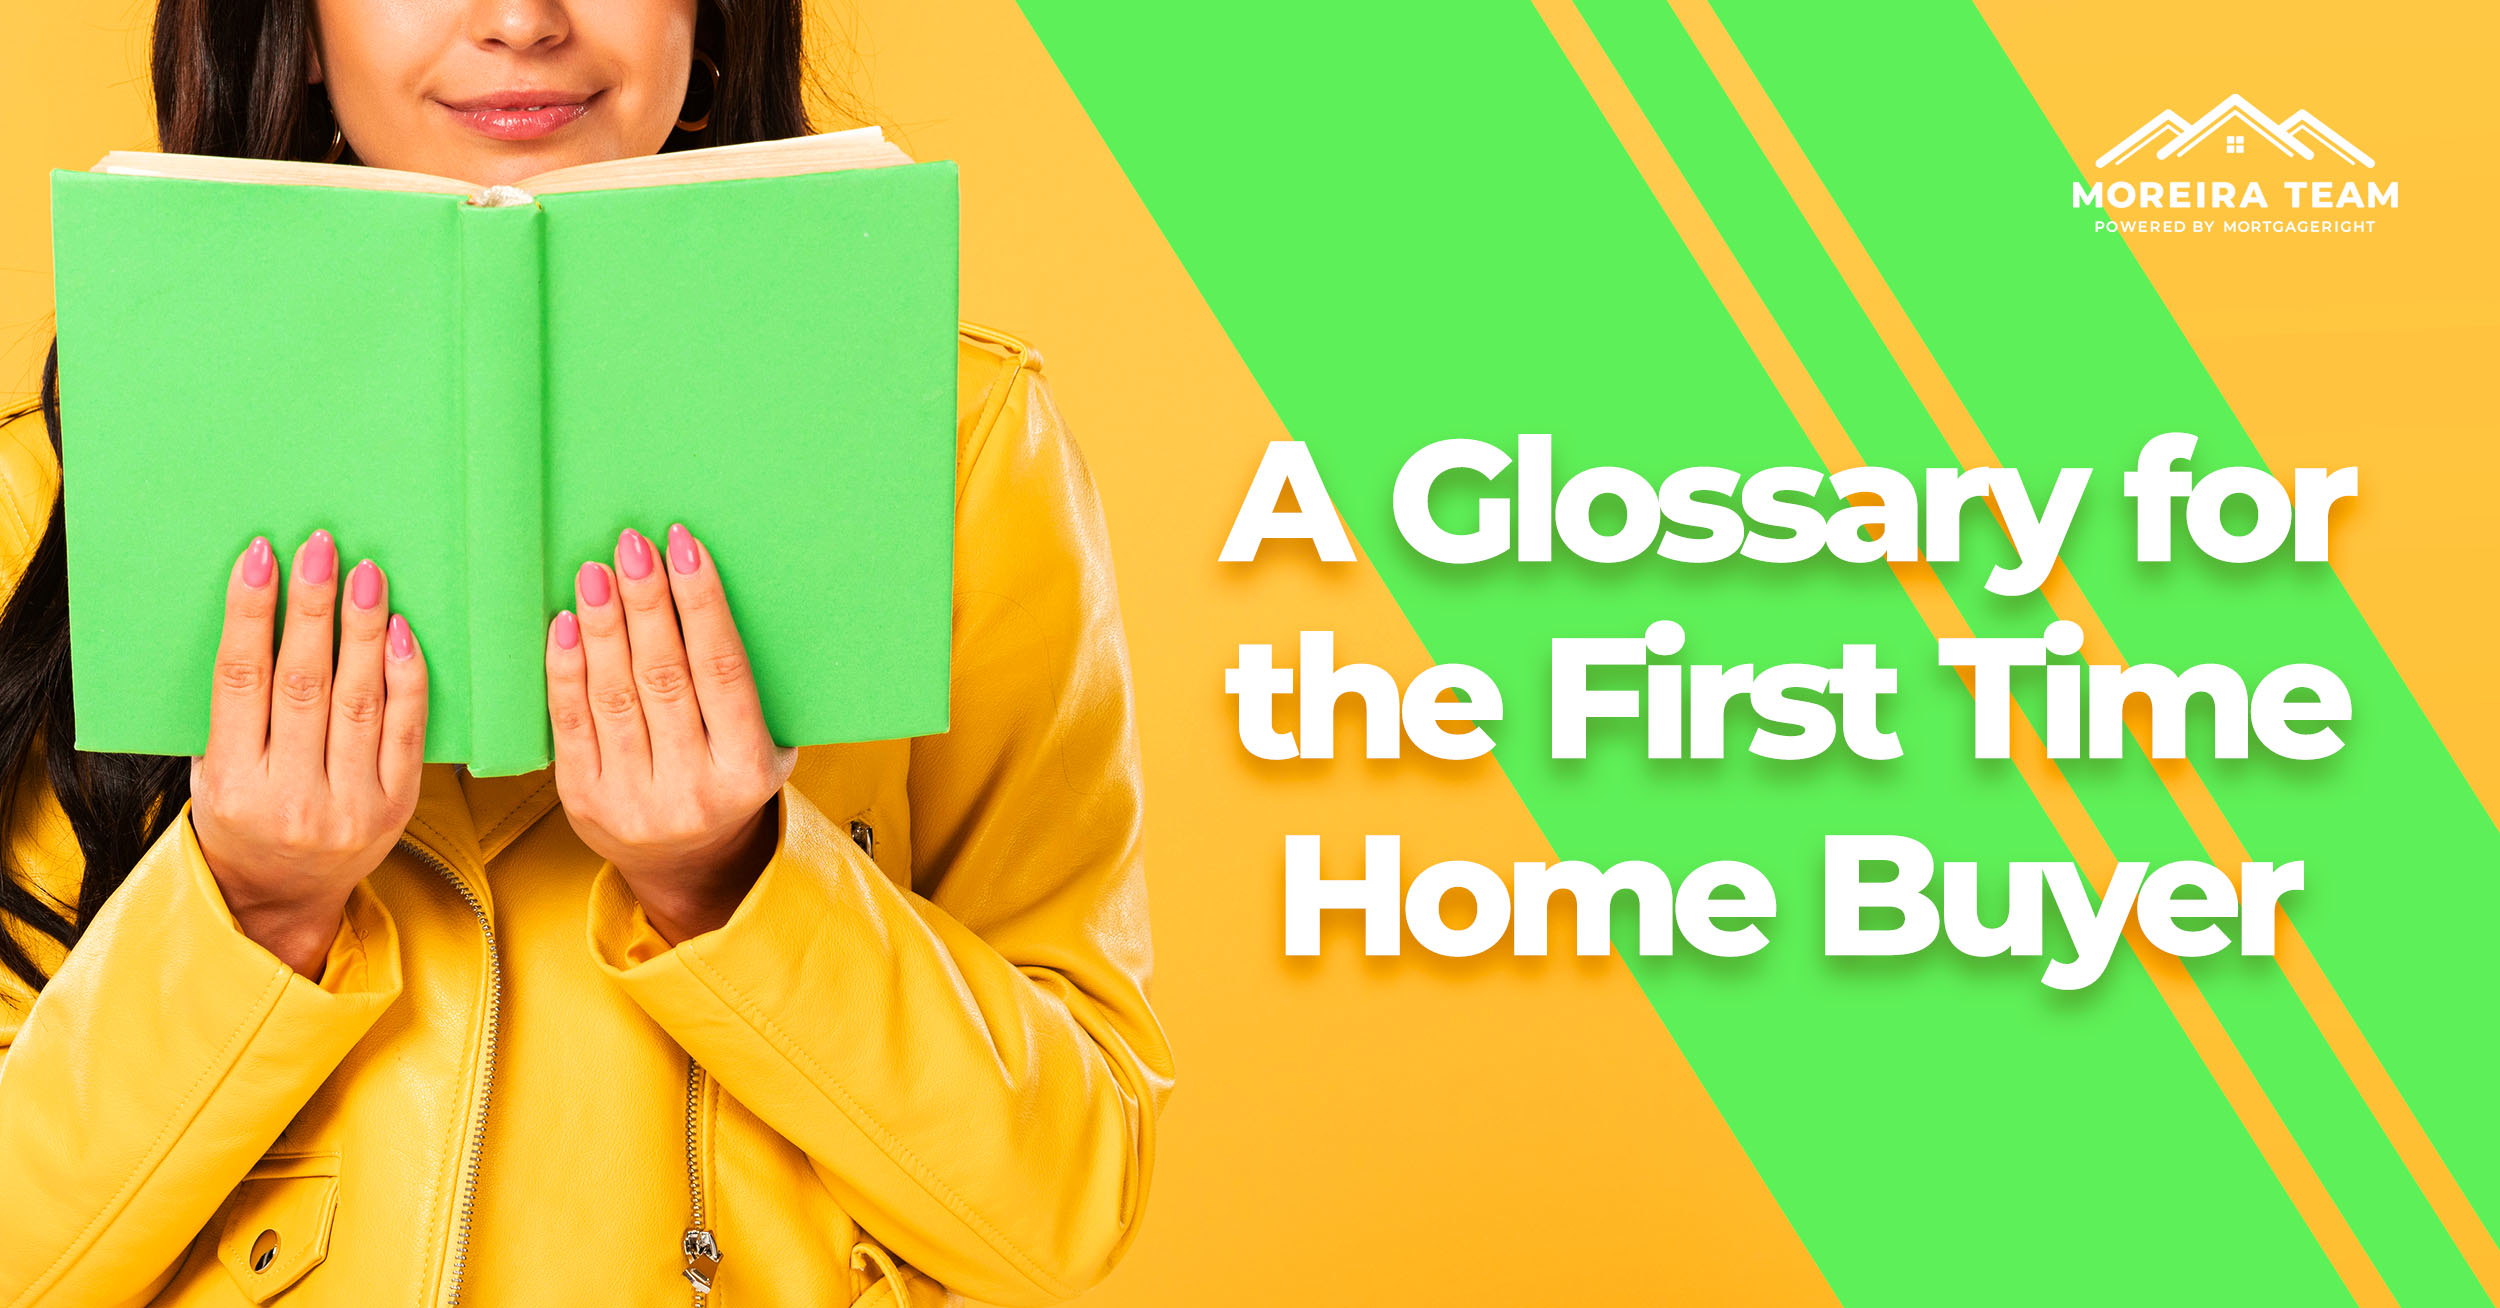 Navigating Jargon: A Glossary for the First Time Home Buyer